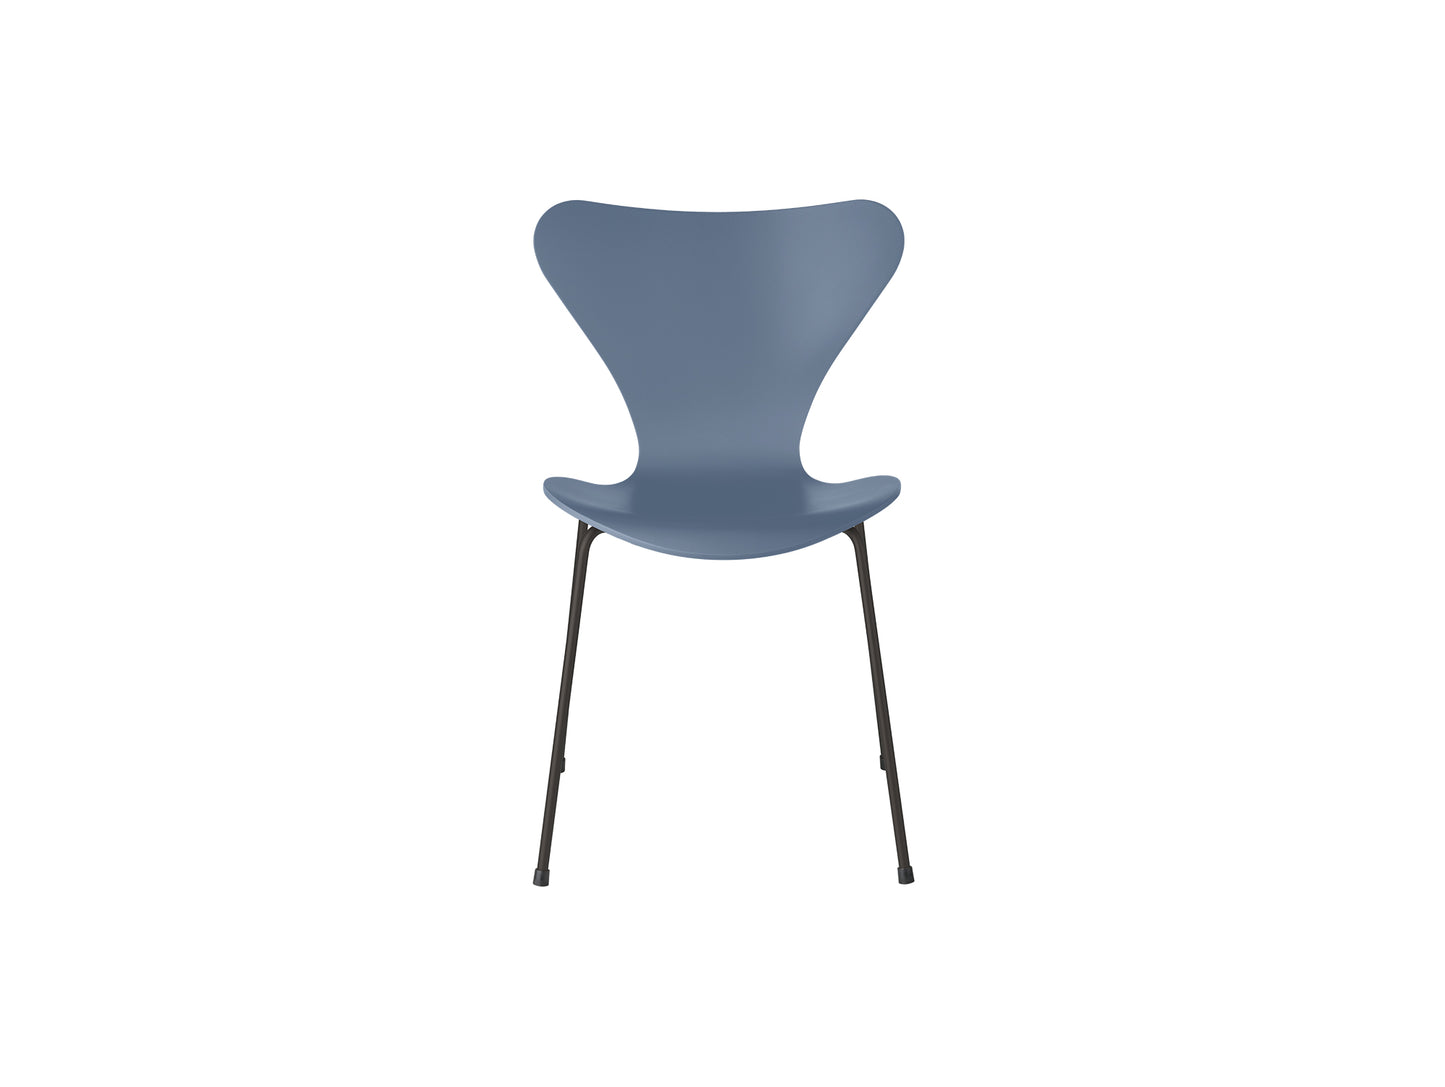 Series 7™ 3107 Dining Chair by Fritz Hansen - Dusk Blue Lacquered Veneer Shell / Warm Graphite Steel